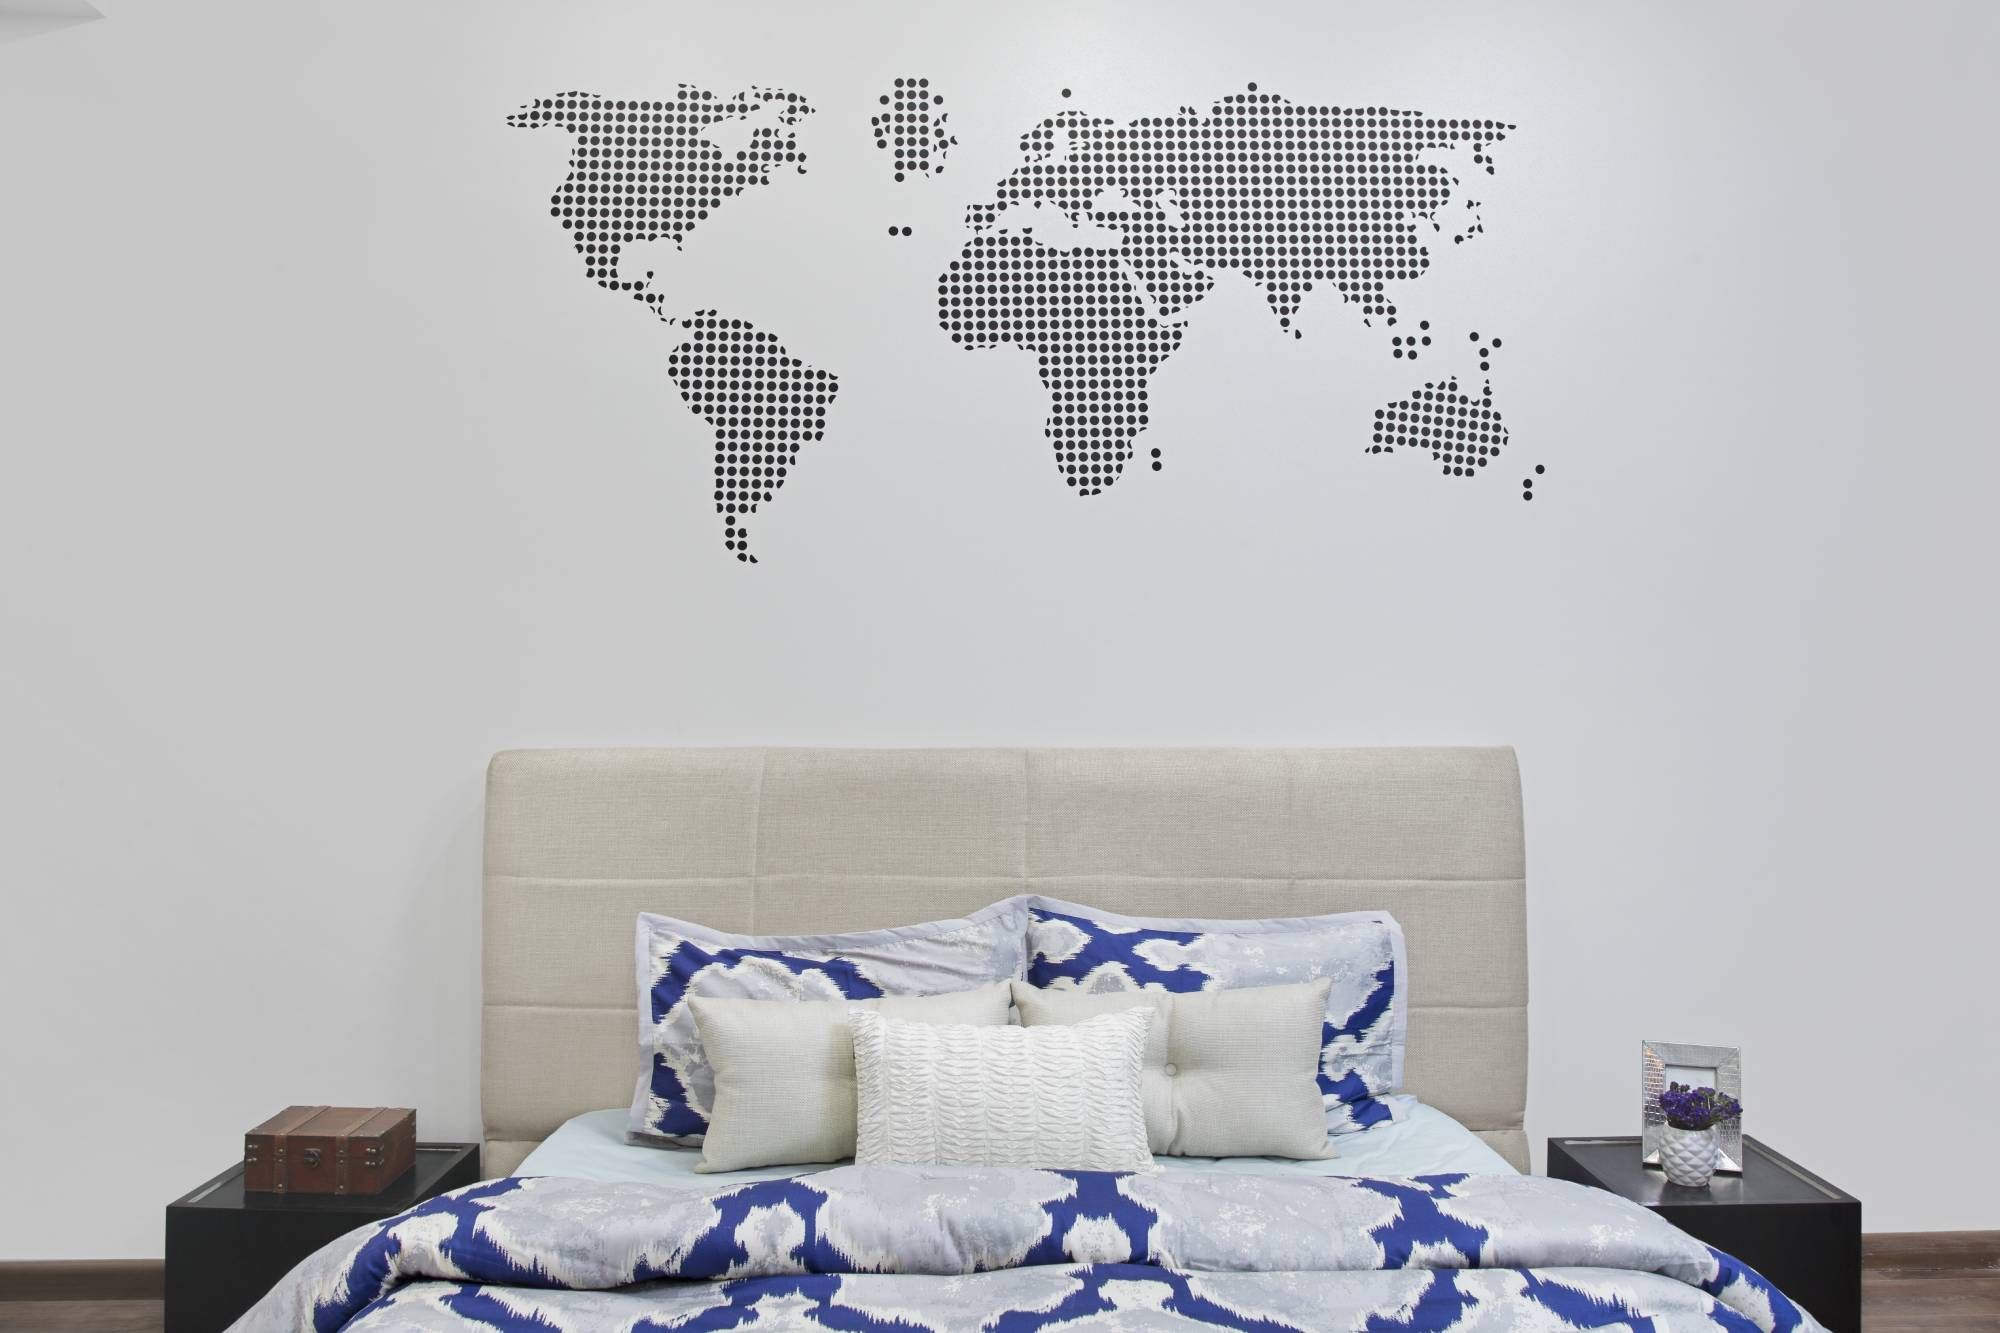 Modern White Kid's Bedroom Design With World Map Wall Decor